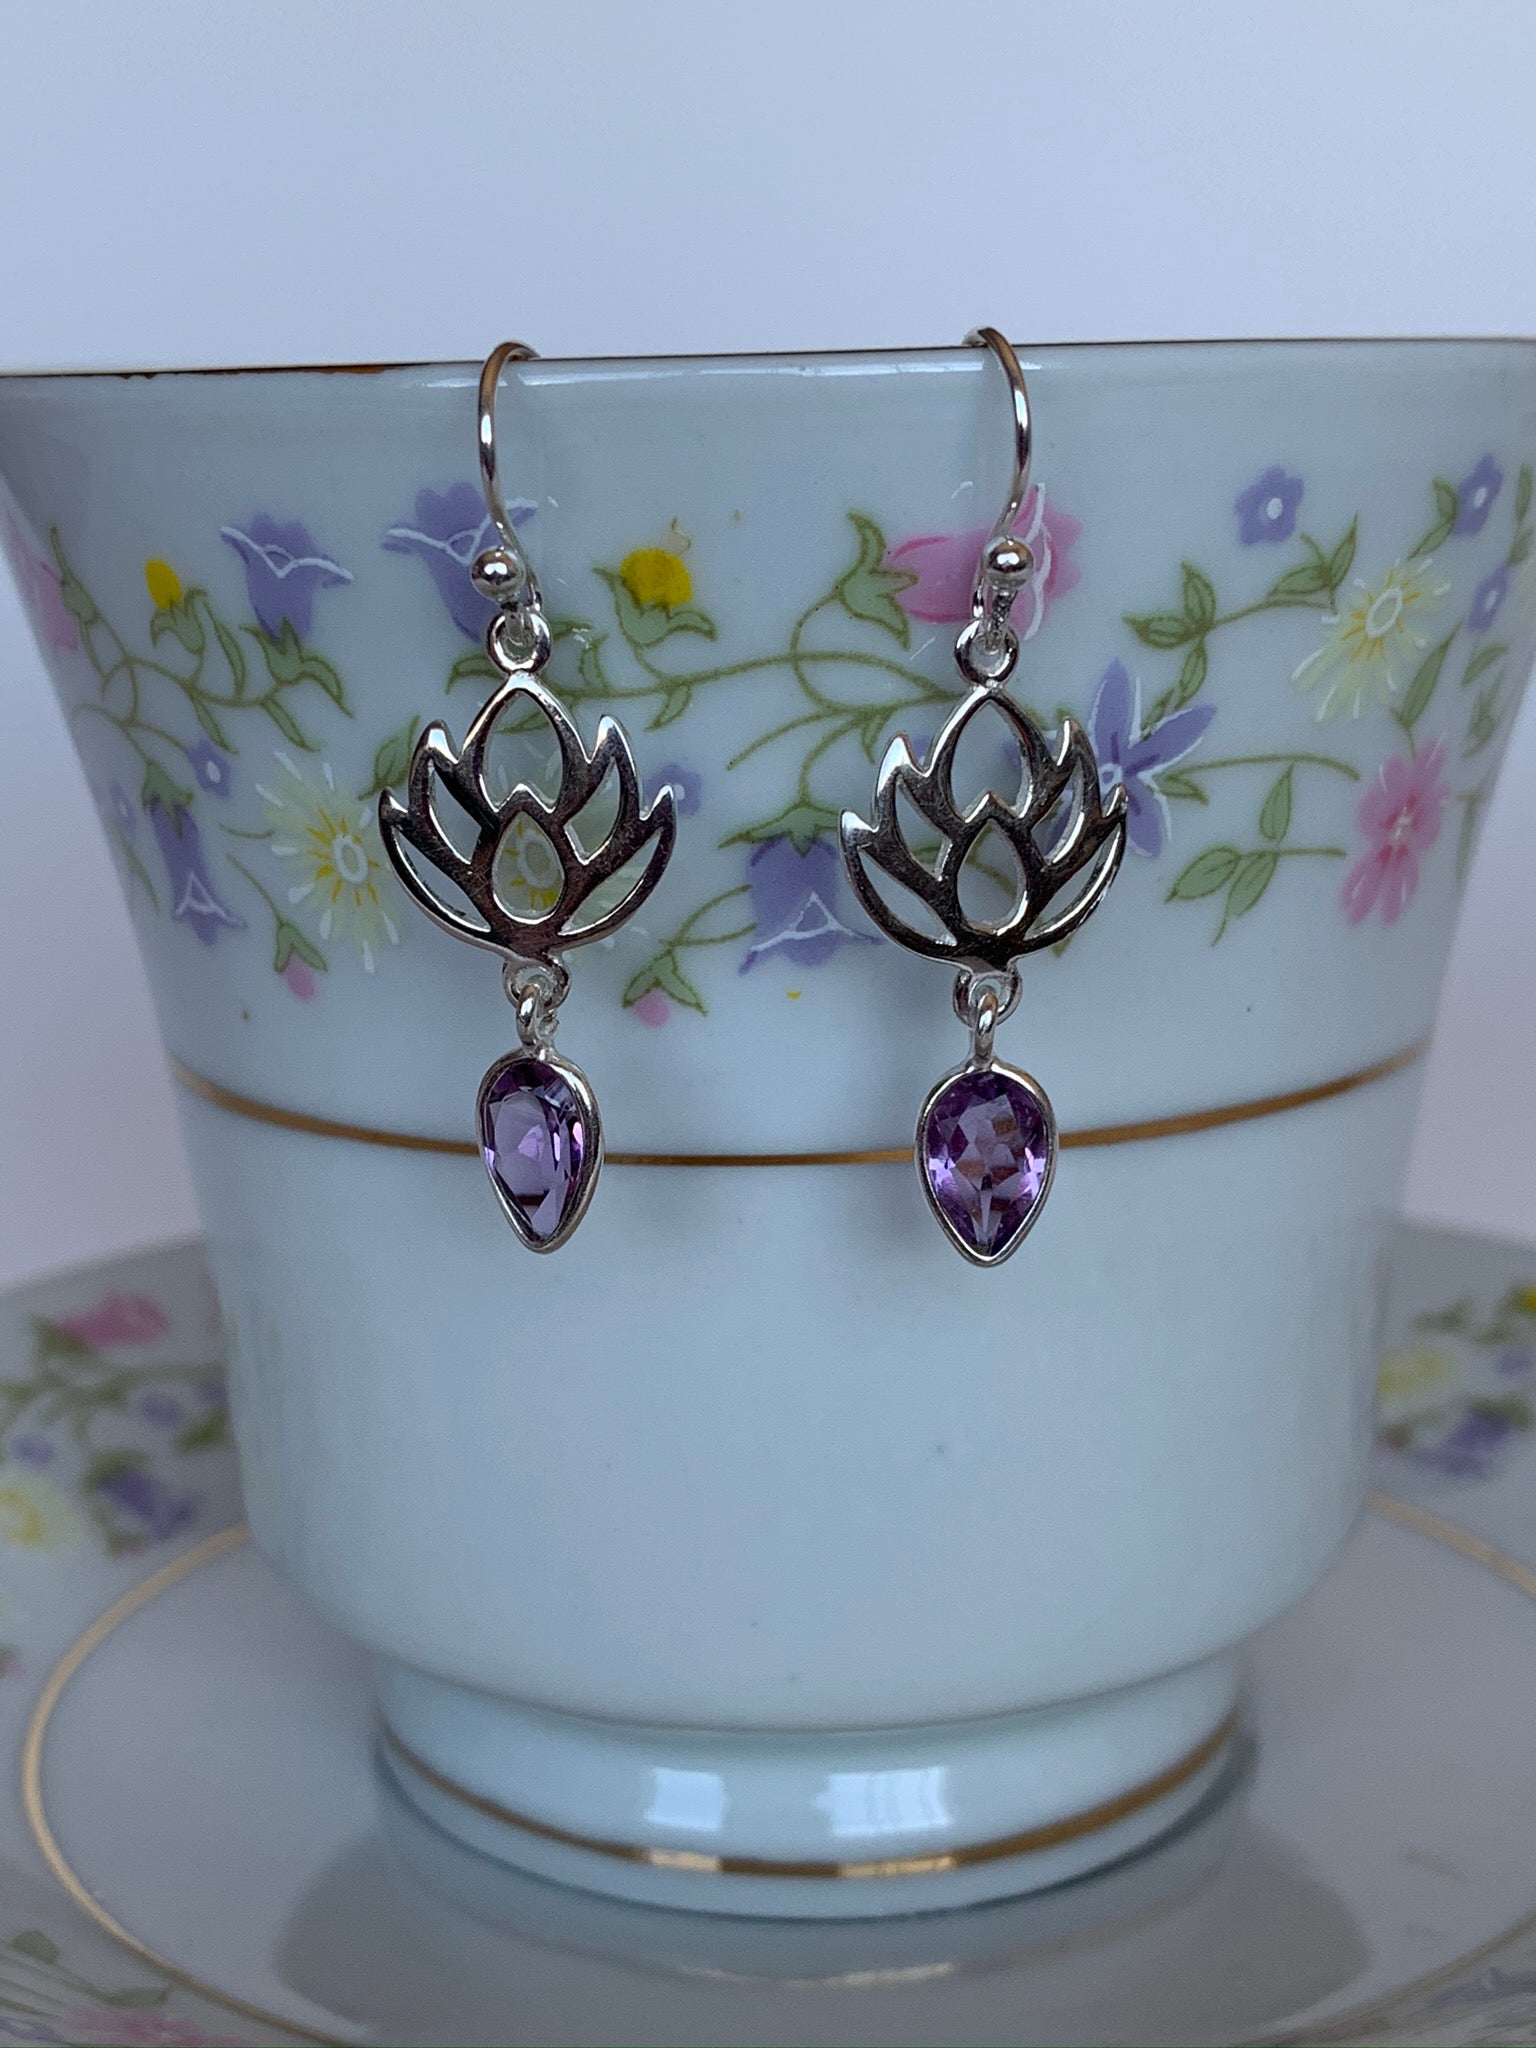 Close up of sterling silver earrings with earring wires, not posts. An amethyst (reverse teardrop) hangs from an open sterling silver lotus design. Earrings are lightweight and are approximately 1½" long.